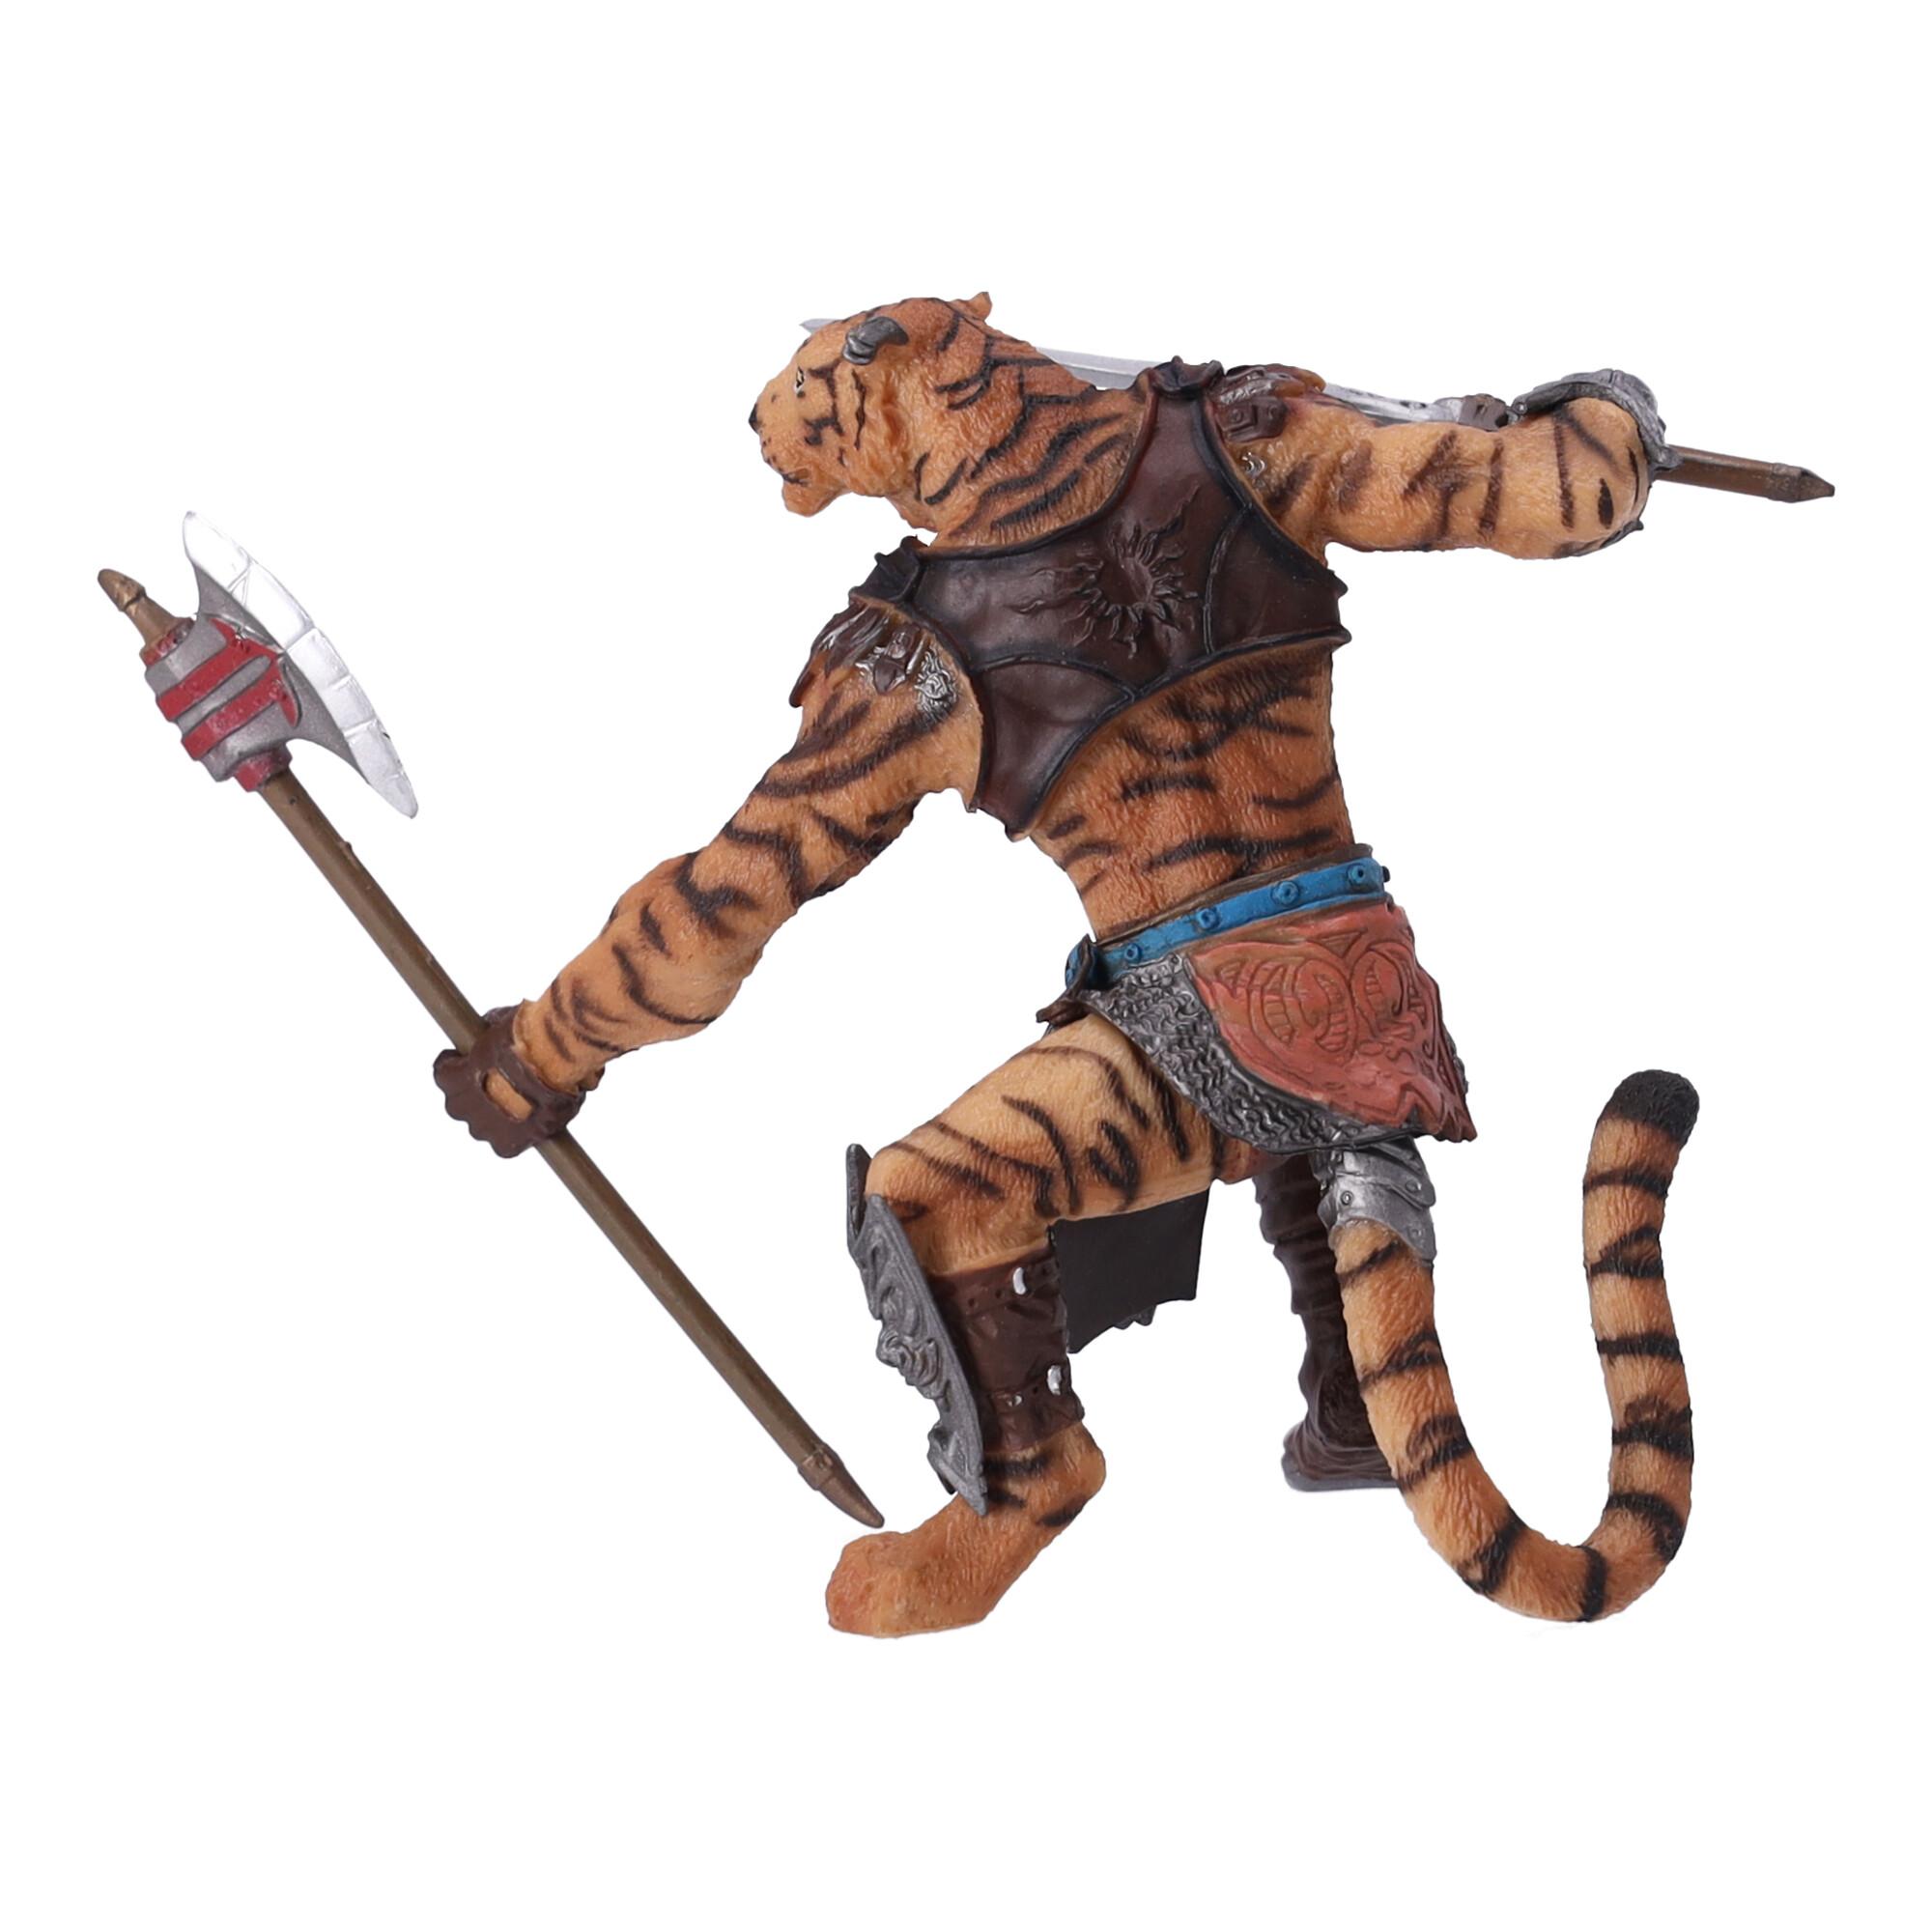 Collectible figurine Mutant tiger, Papo